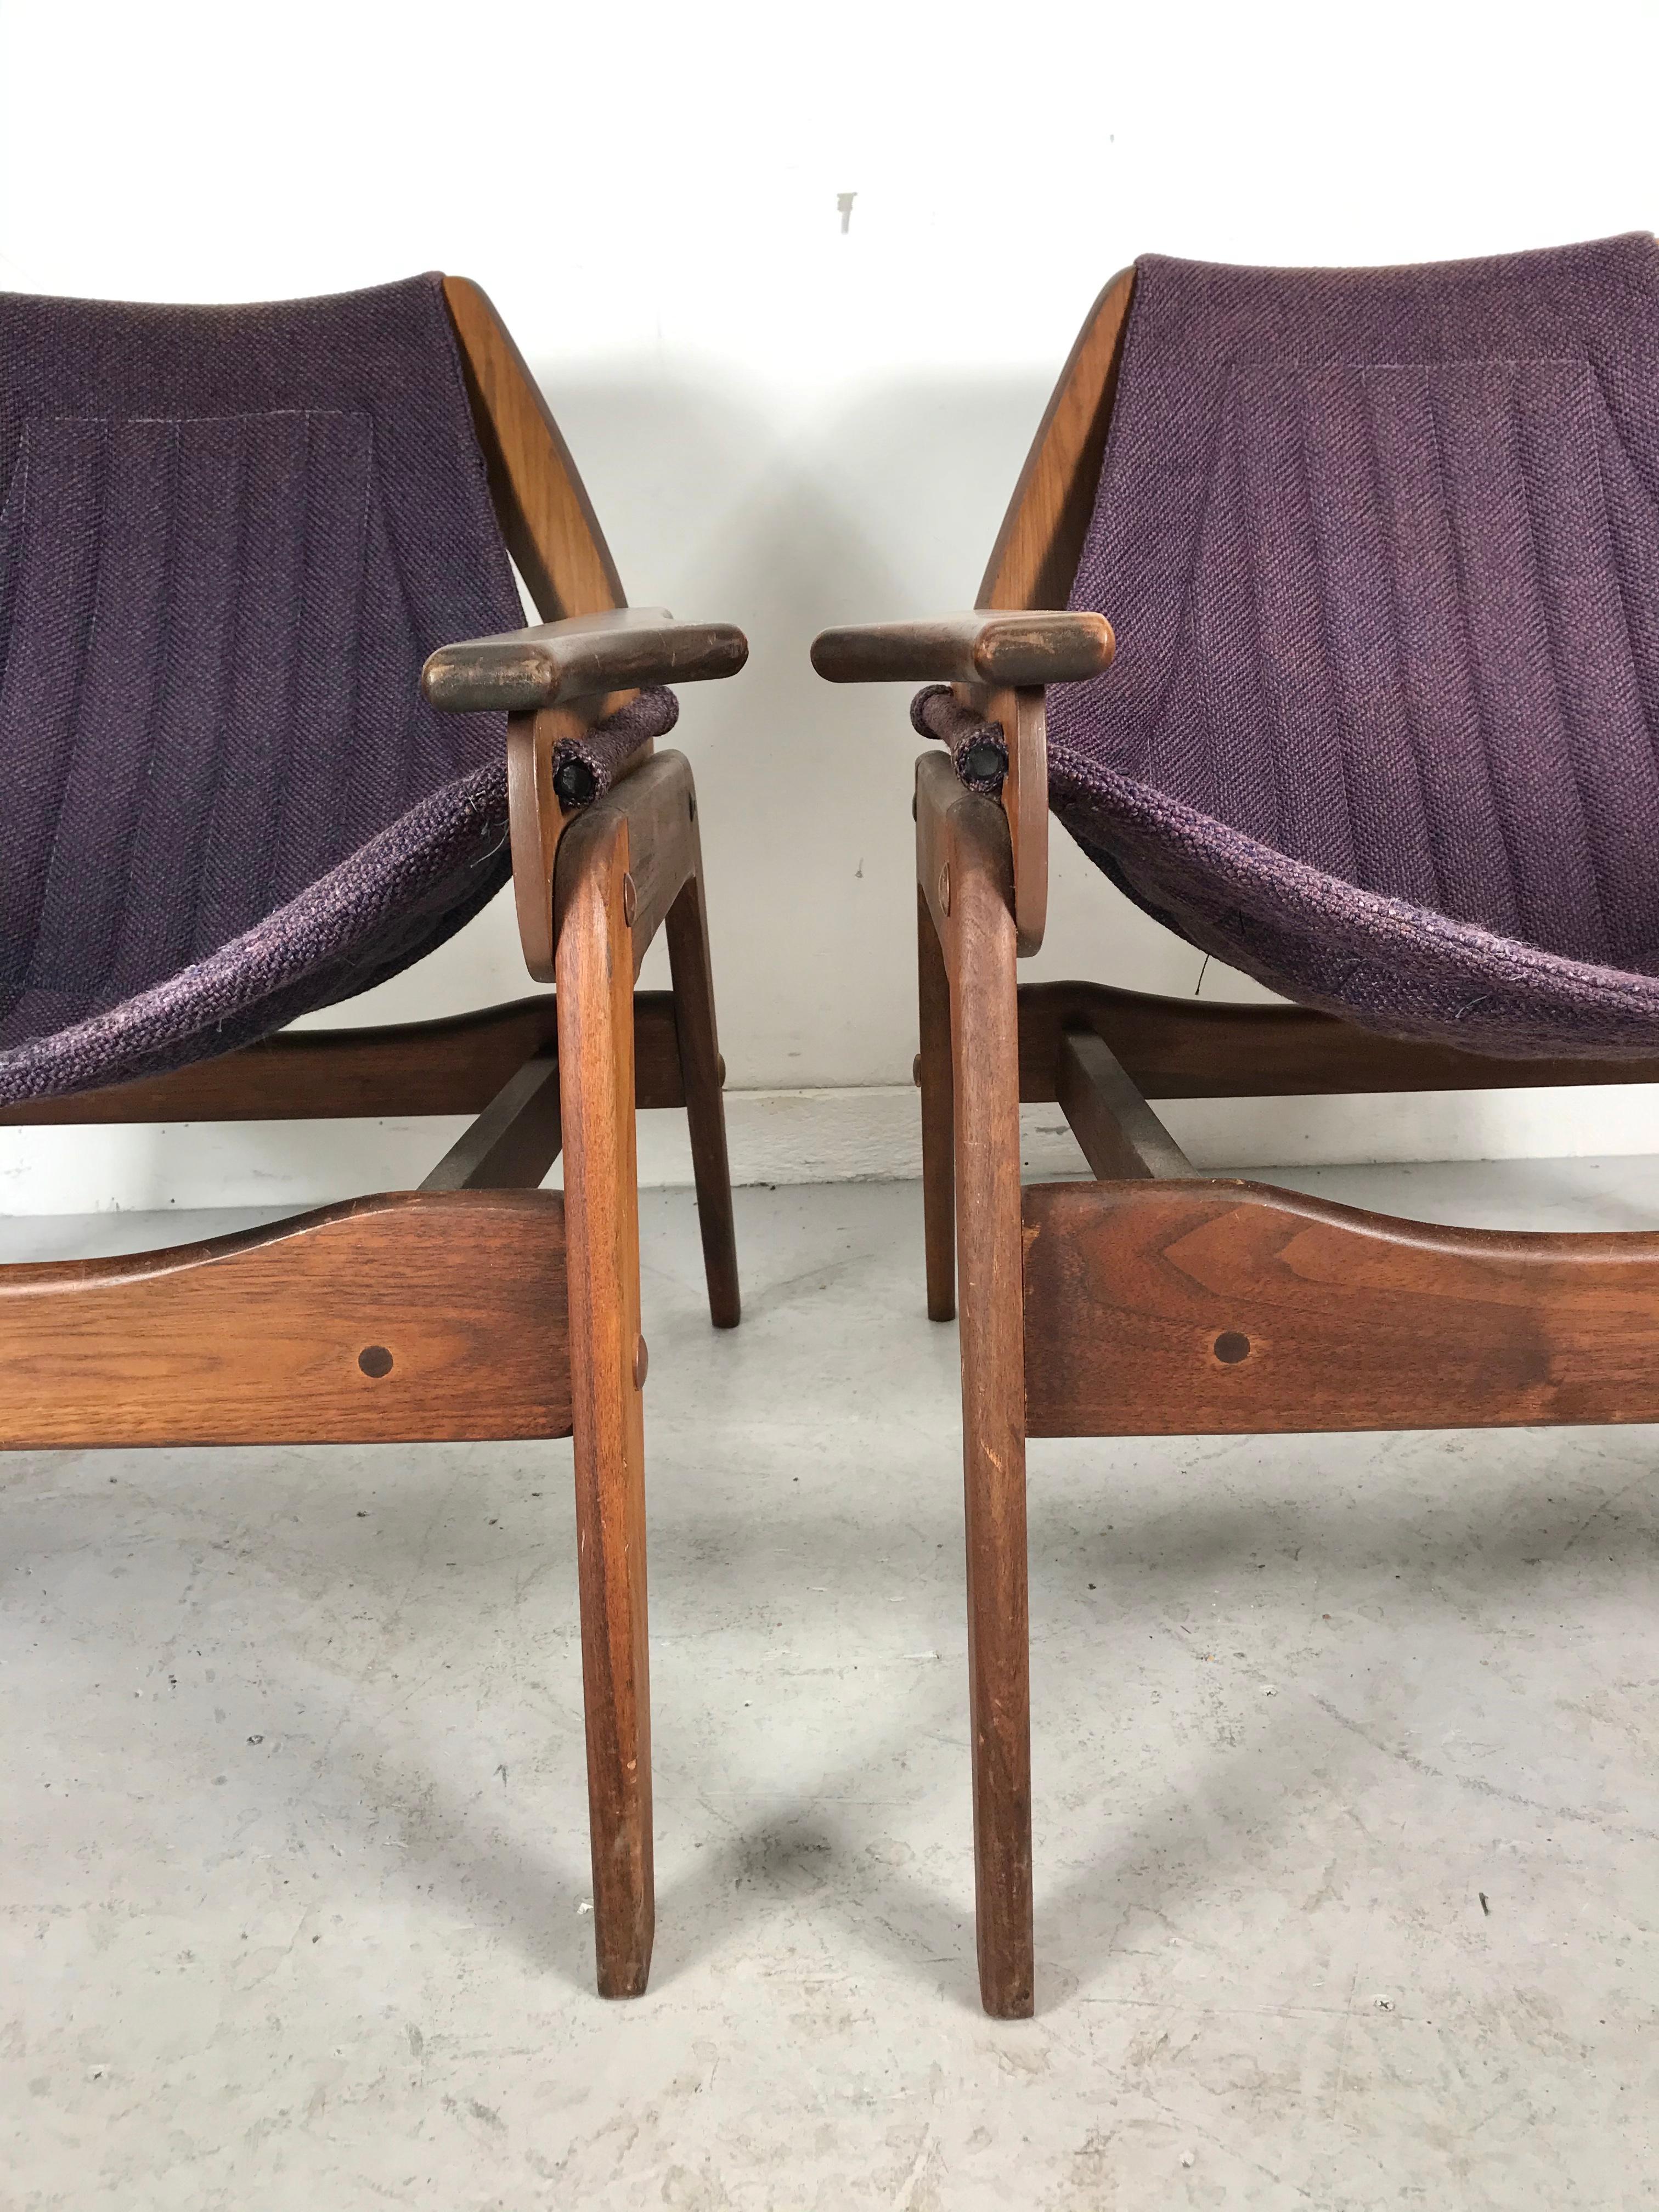 American Mid-Century Modern Triumph I Sling Chairs by Jerry Johnson for Charlton